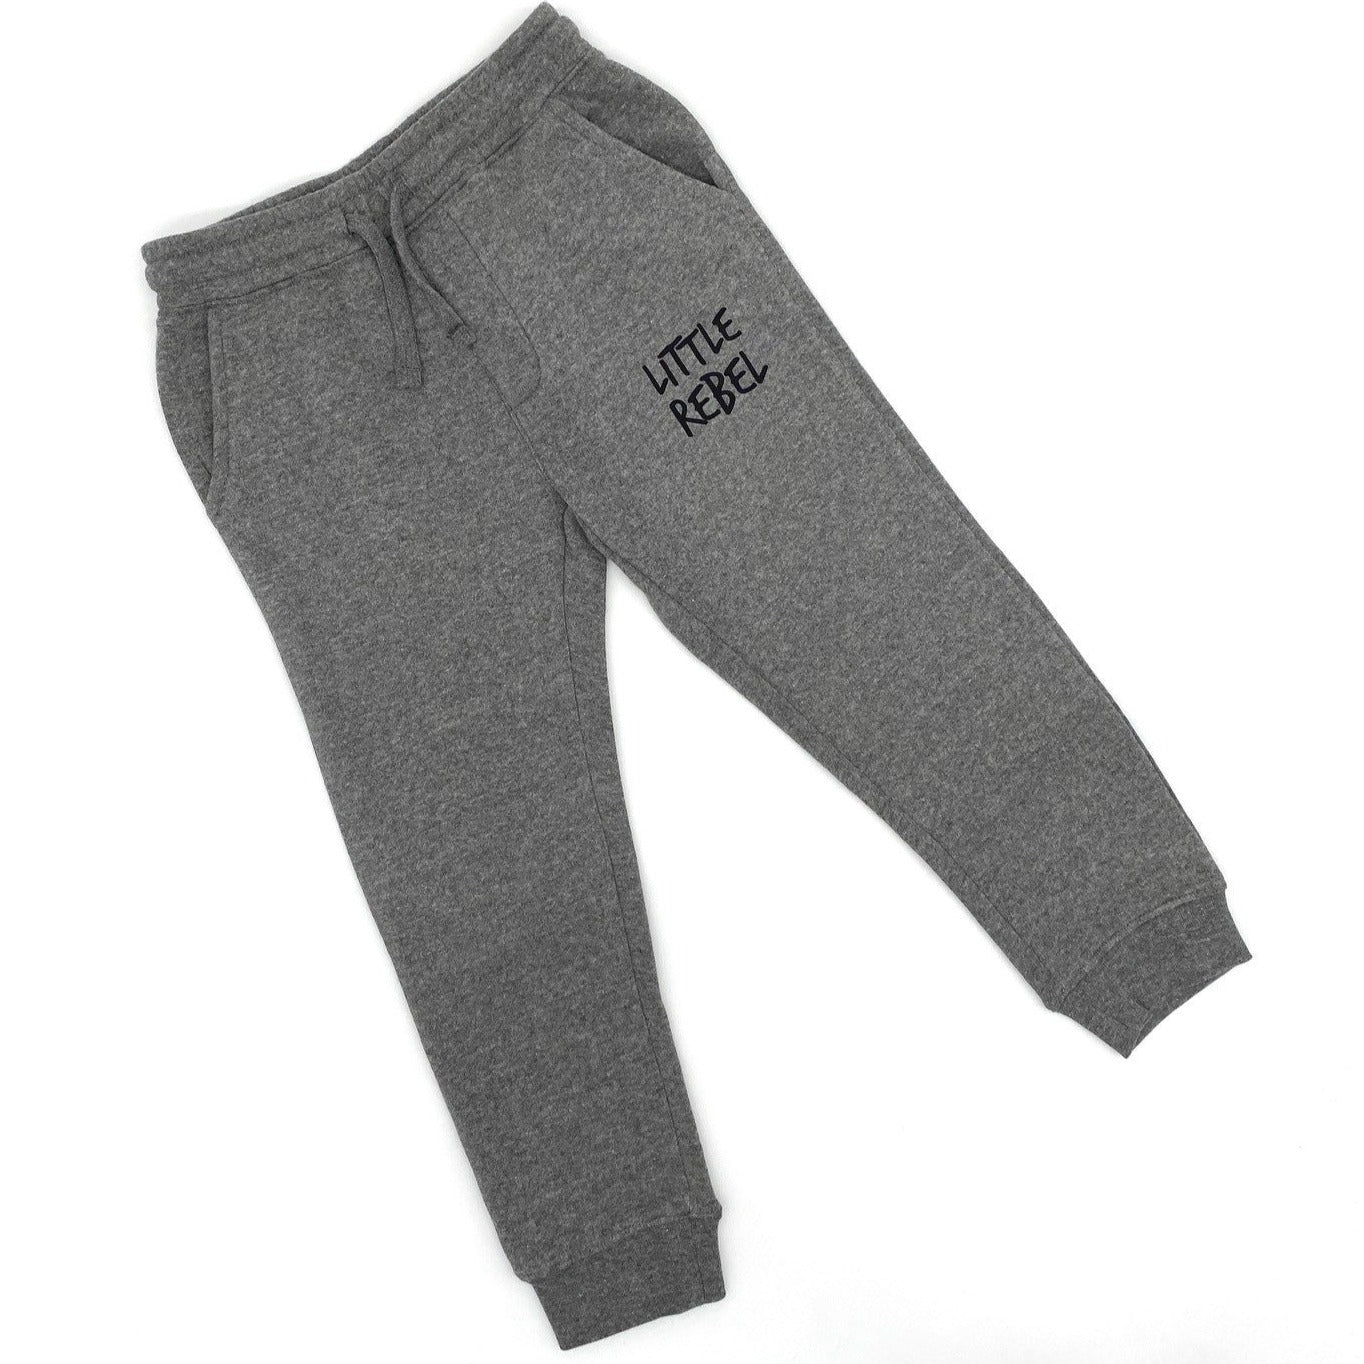 Raising Rebels Women's Sweatpants – Little Rebels with a Cause